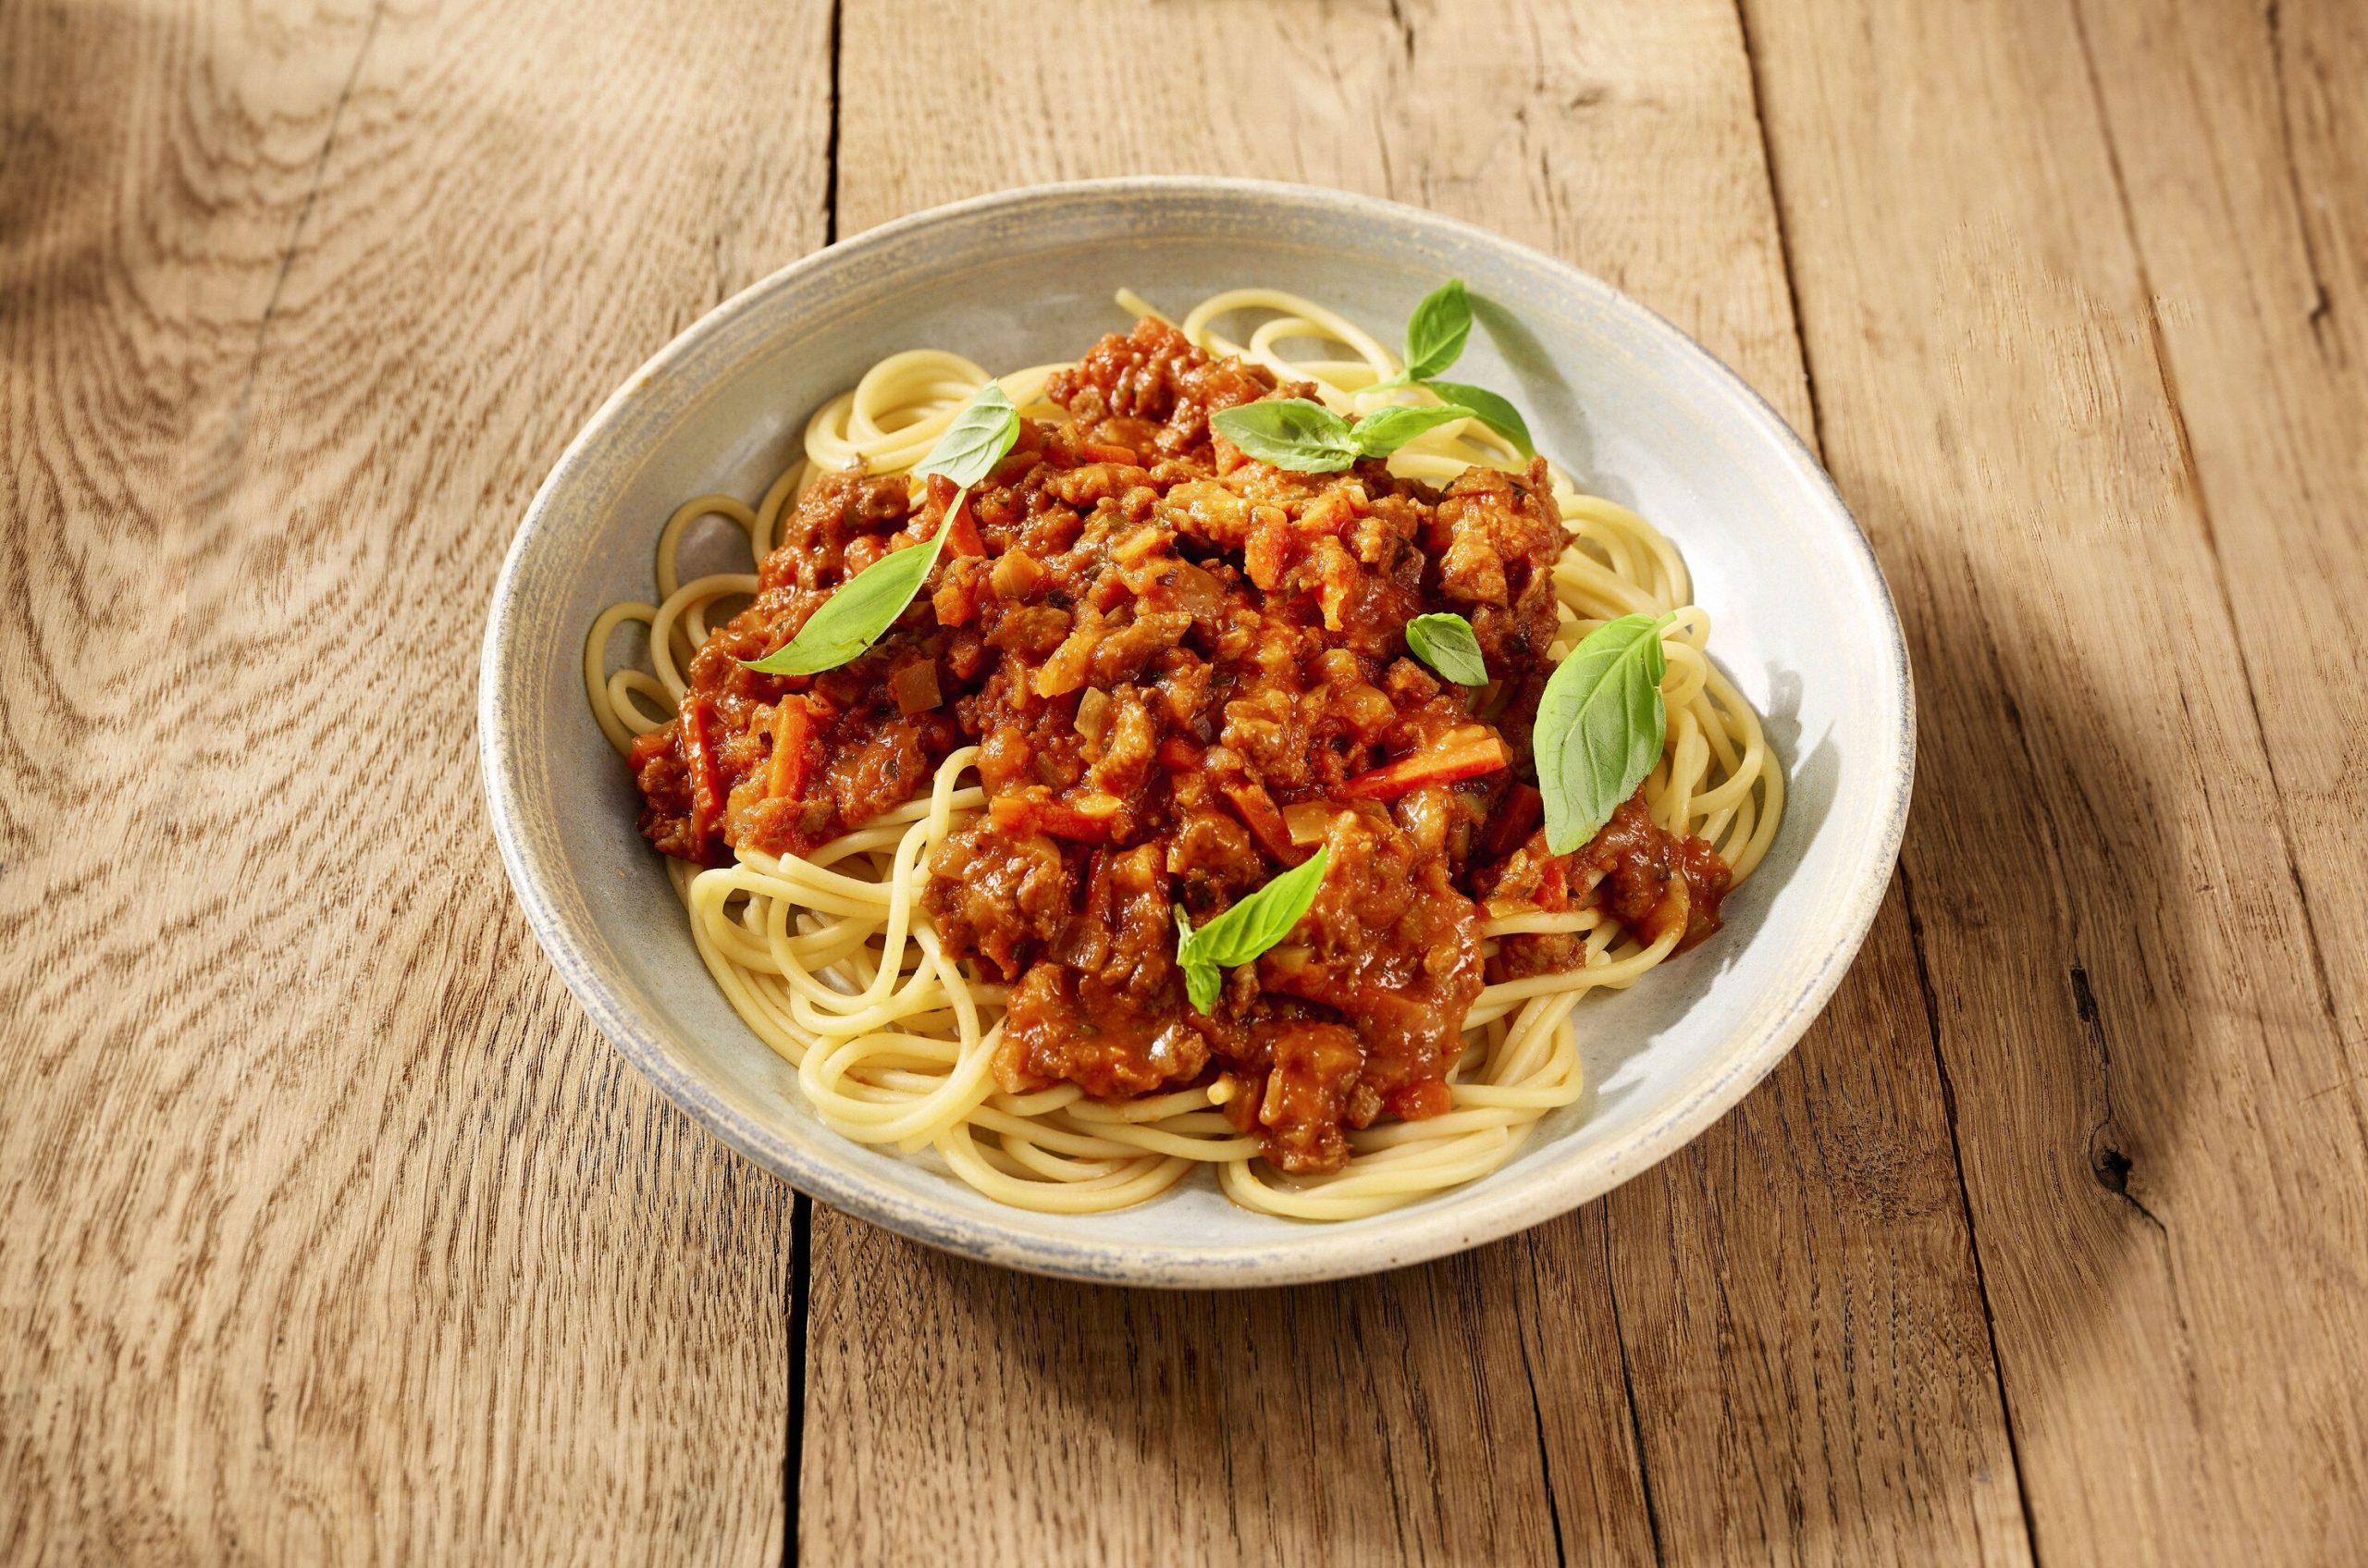 www.znewsservice.com beyond meat launches plant based ready meals range in the uk beyond meals spaghetti bolognese scaled